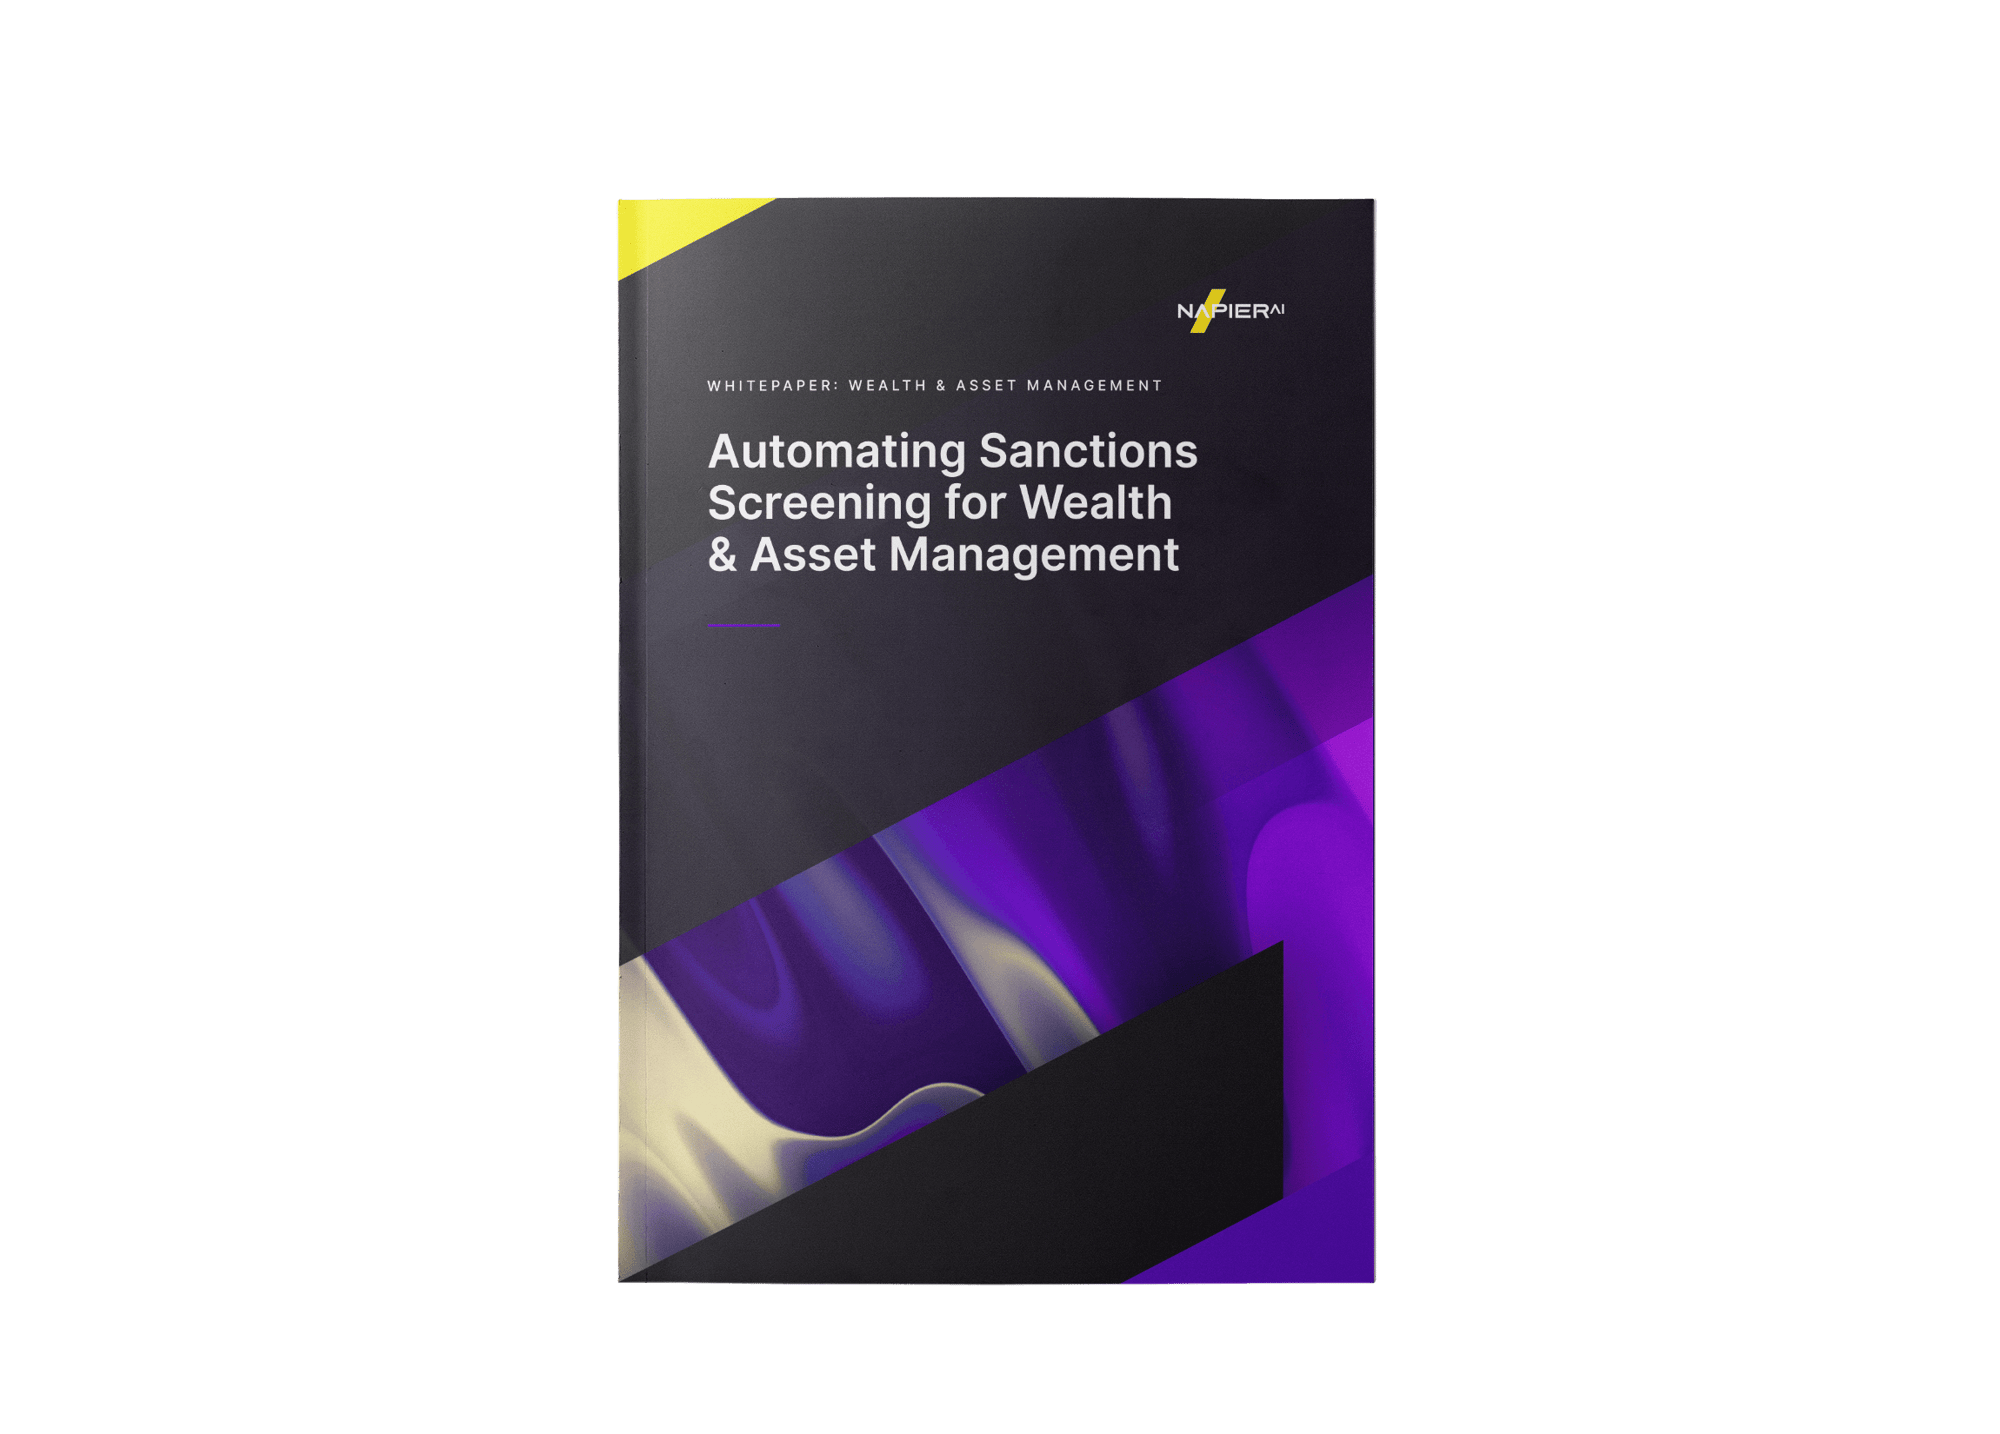 Automating Sanctions eBook